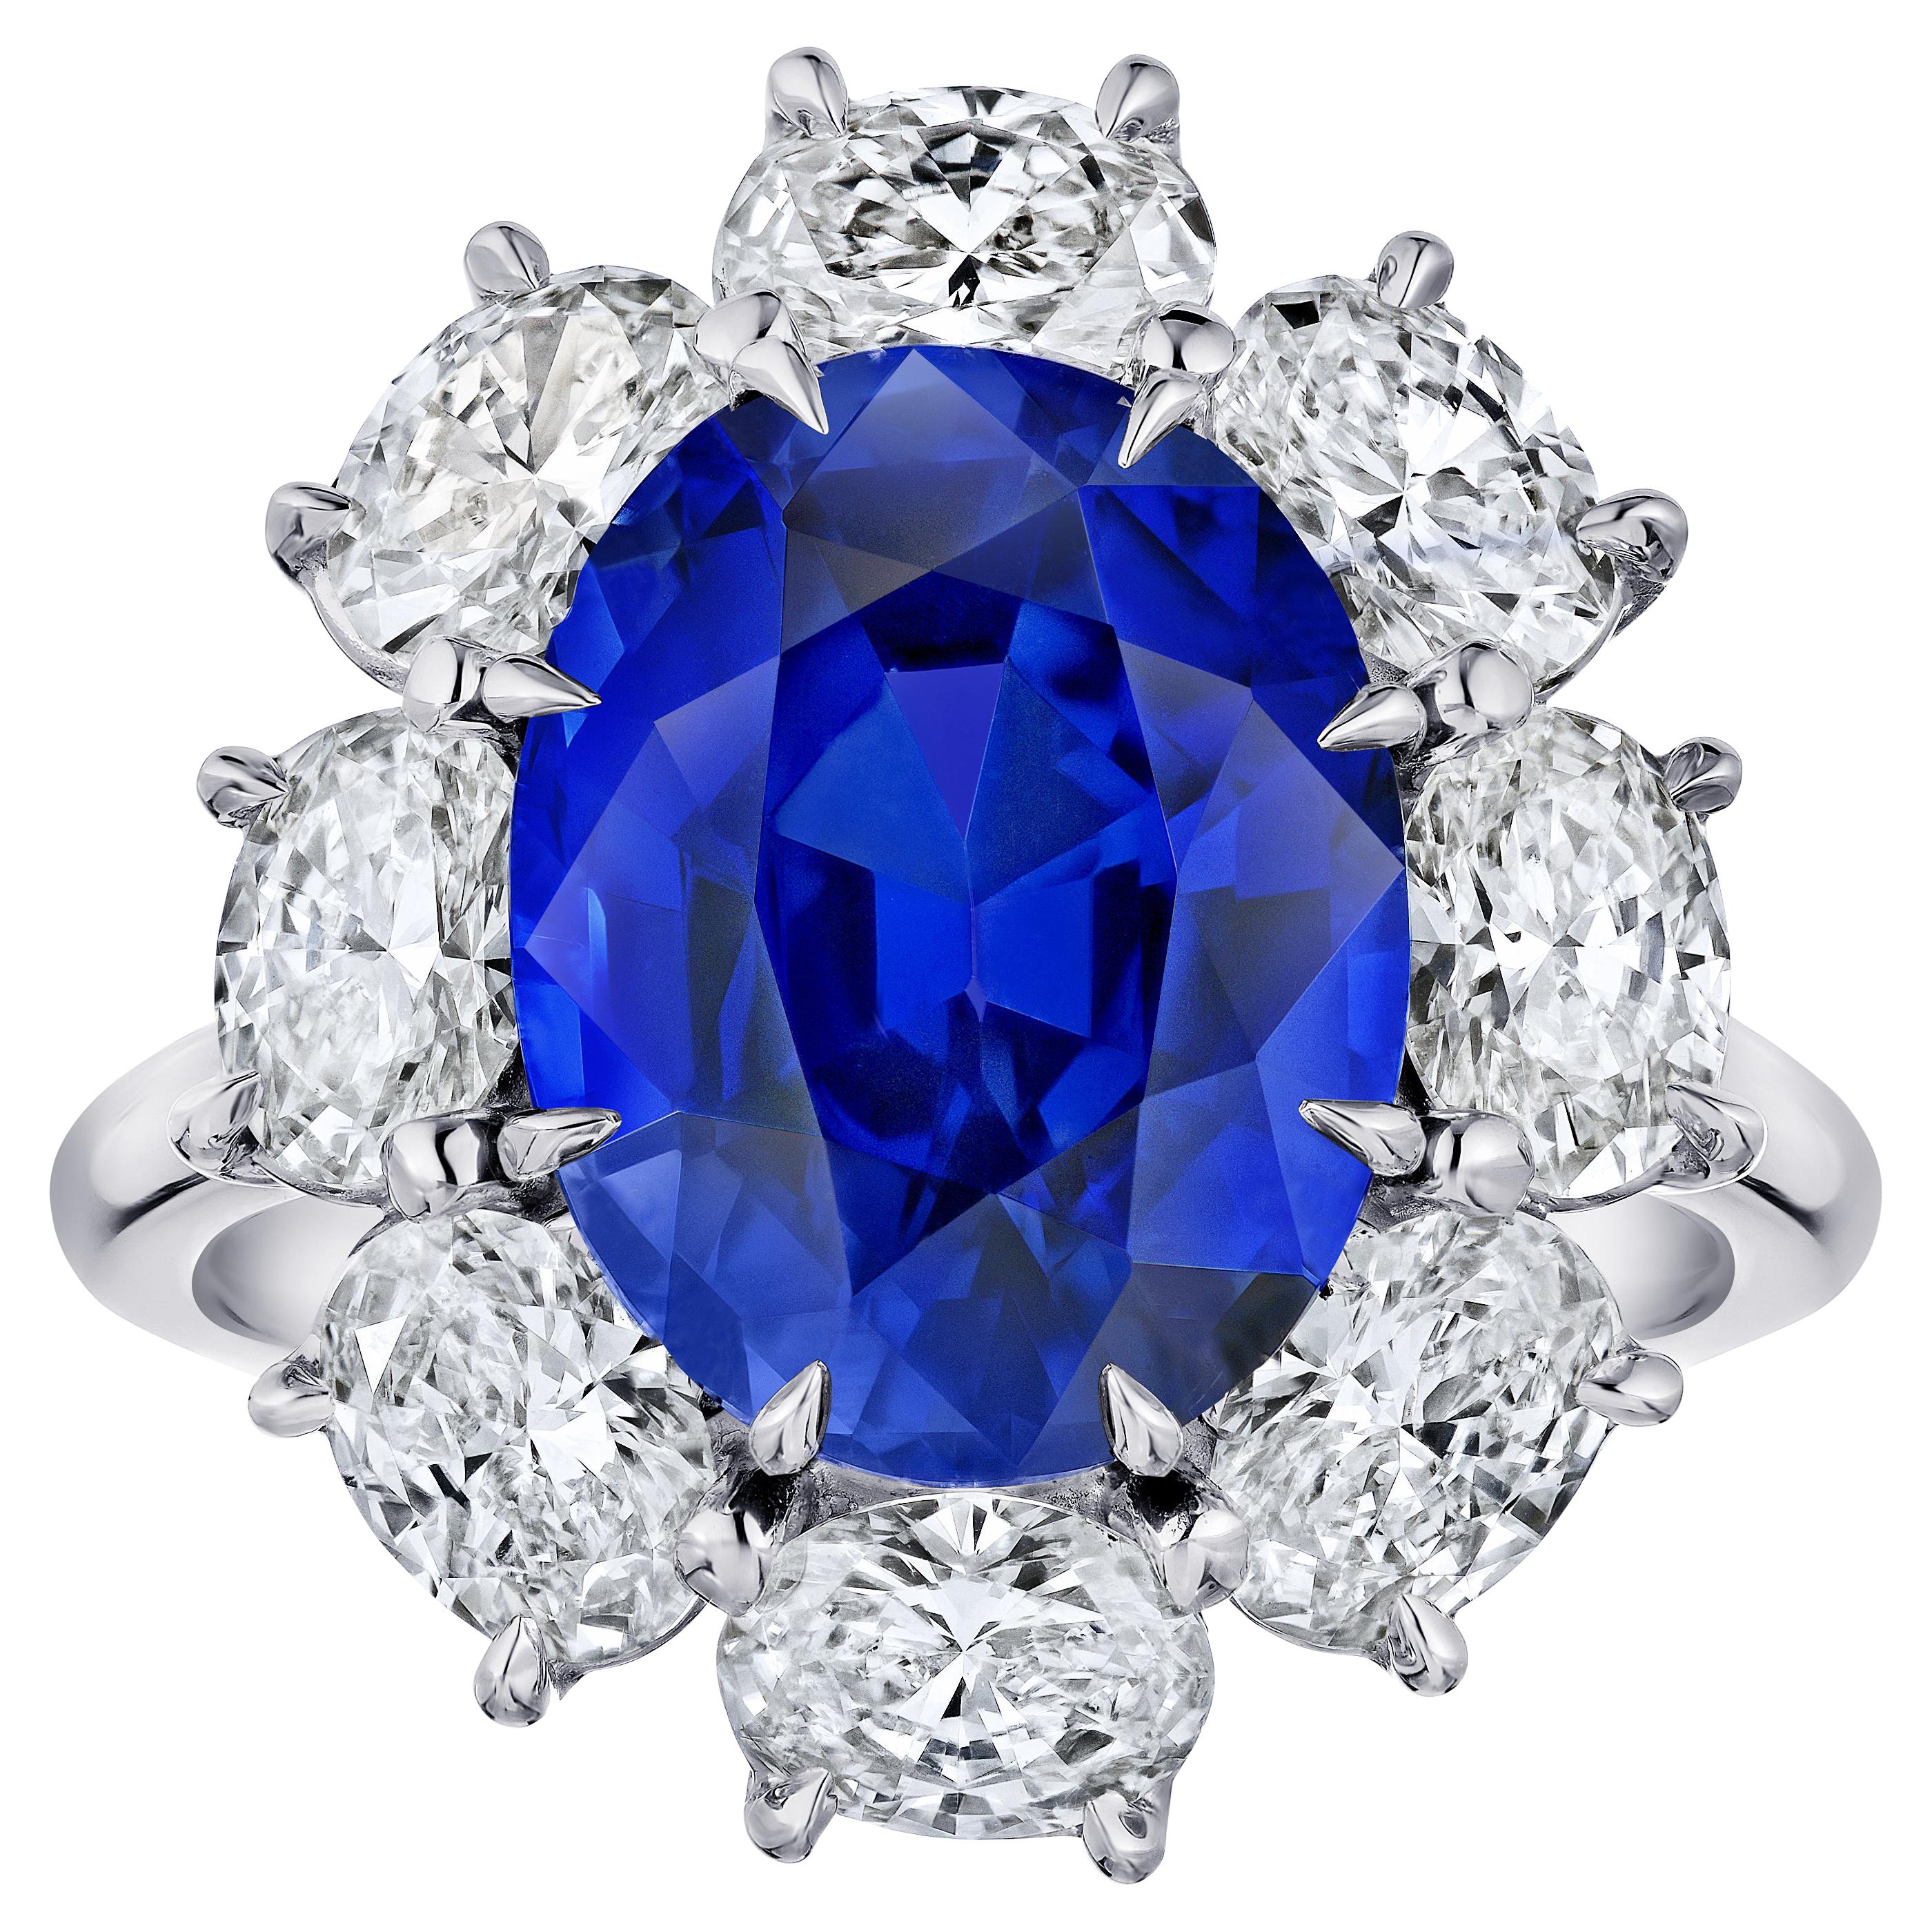 For Sale:  “Diana” Spaced Oval Halo Six Carat Blue Oval Sapphire Platinum Ring